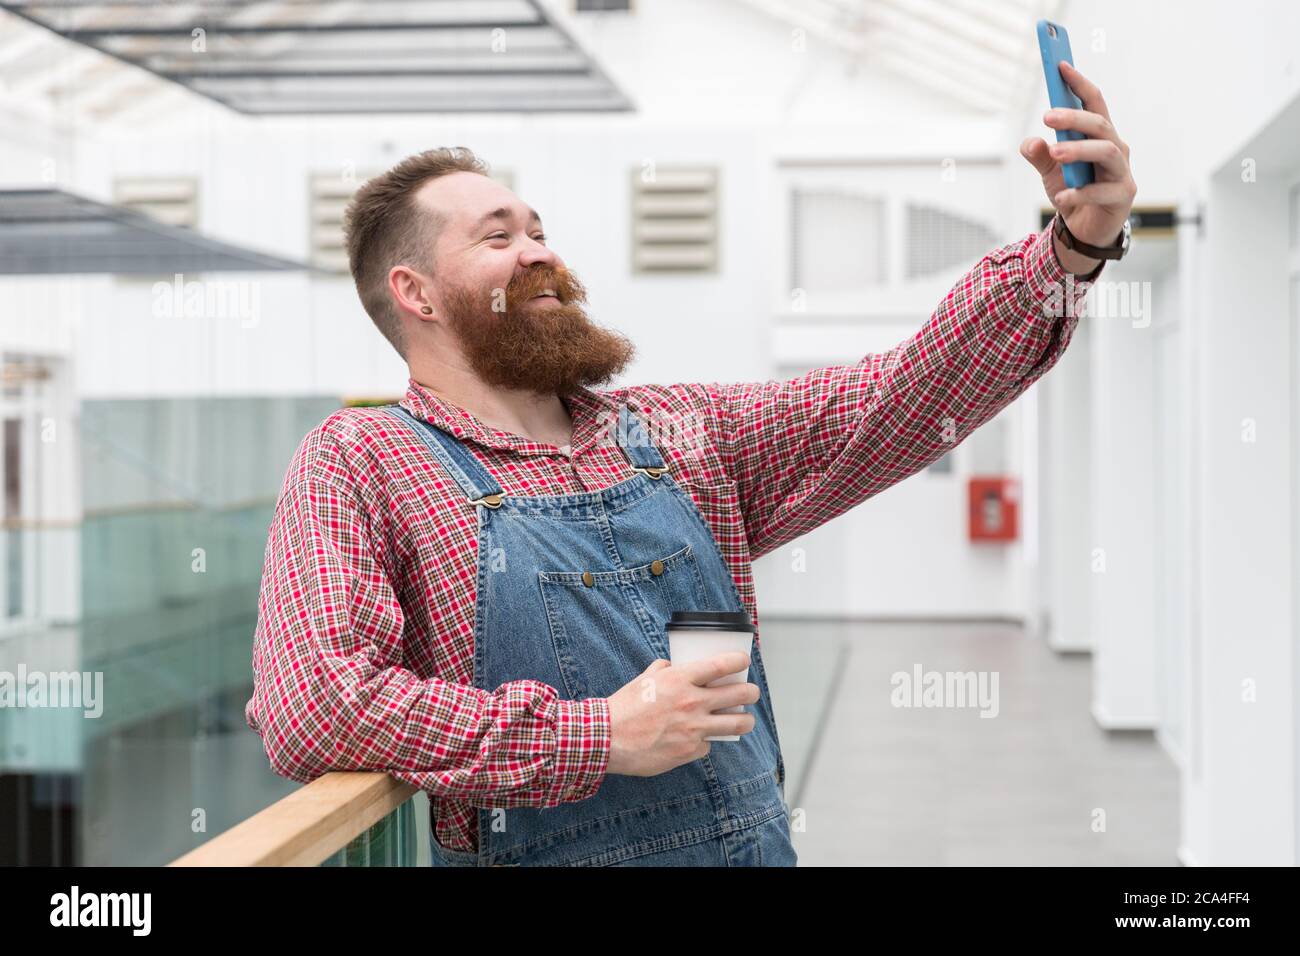 Smiling bearded barber worker in blue overalls, checked shirt, drinking coffee from a paper cup, talking on a video call or taking a selfie on smartph Stock Photo